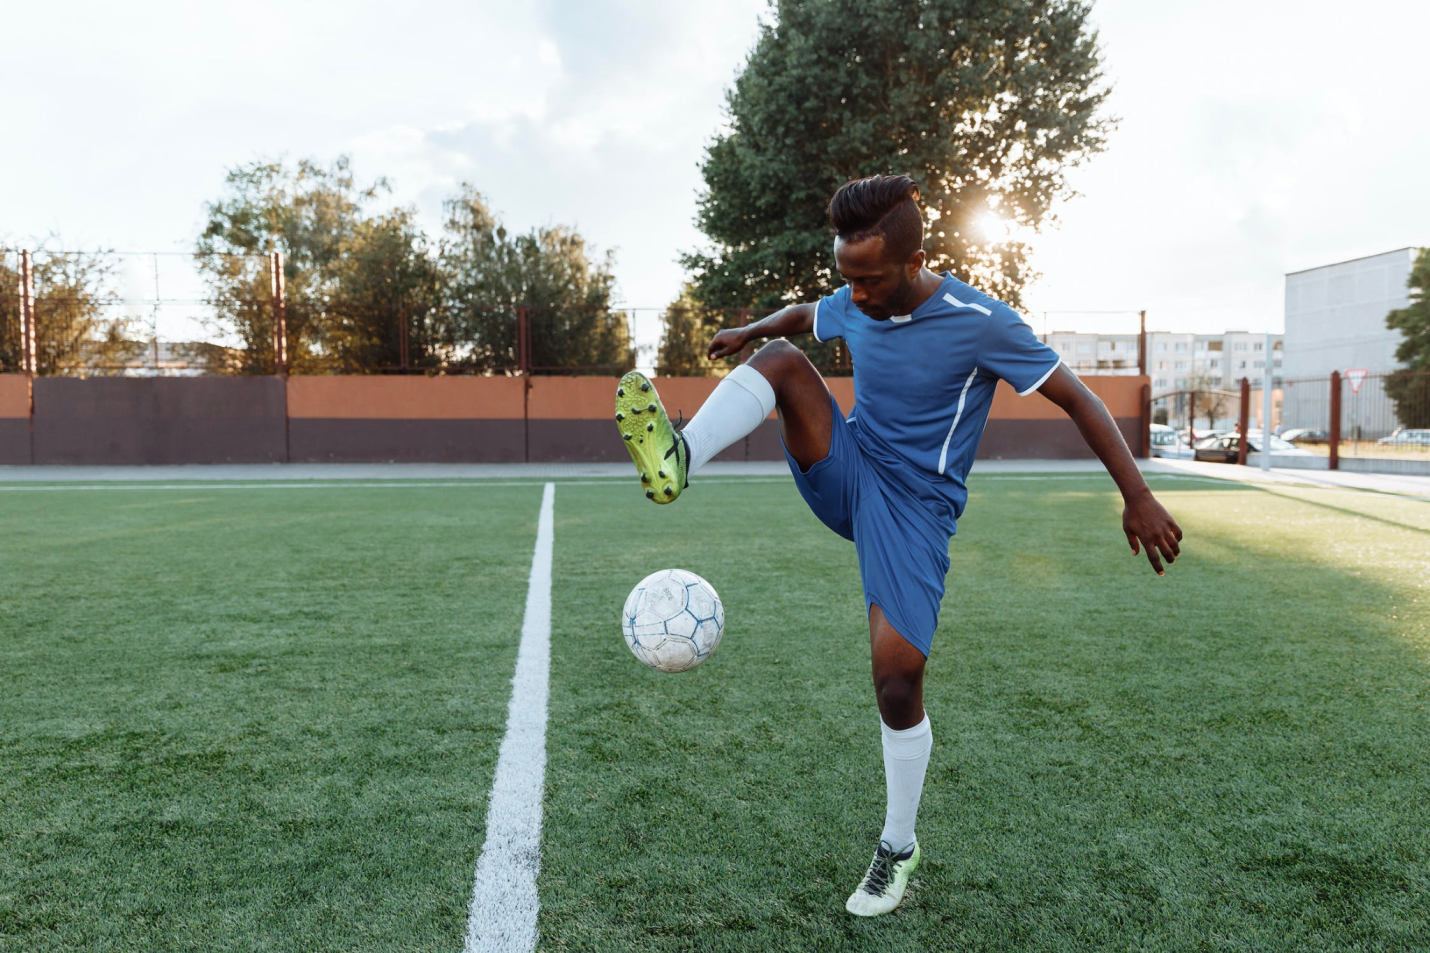 A healthy soccer player performs tricks while on the field